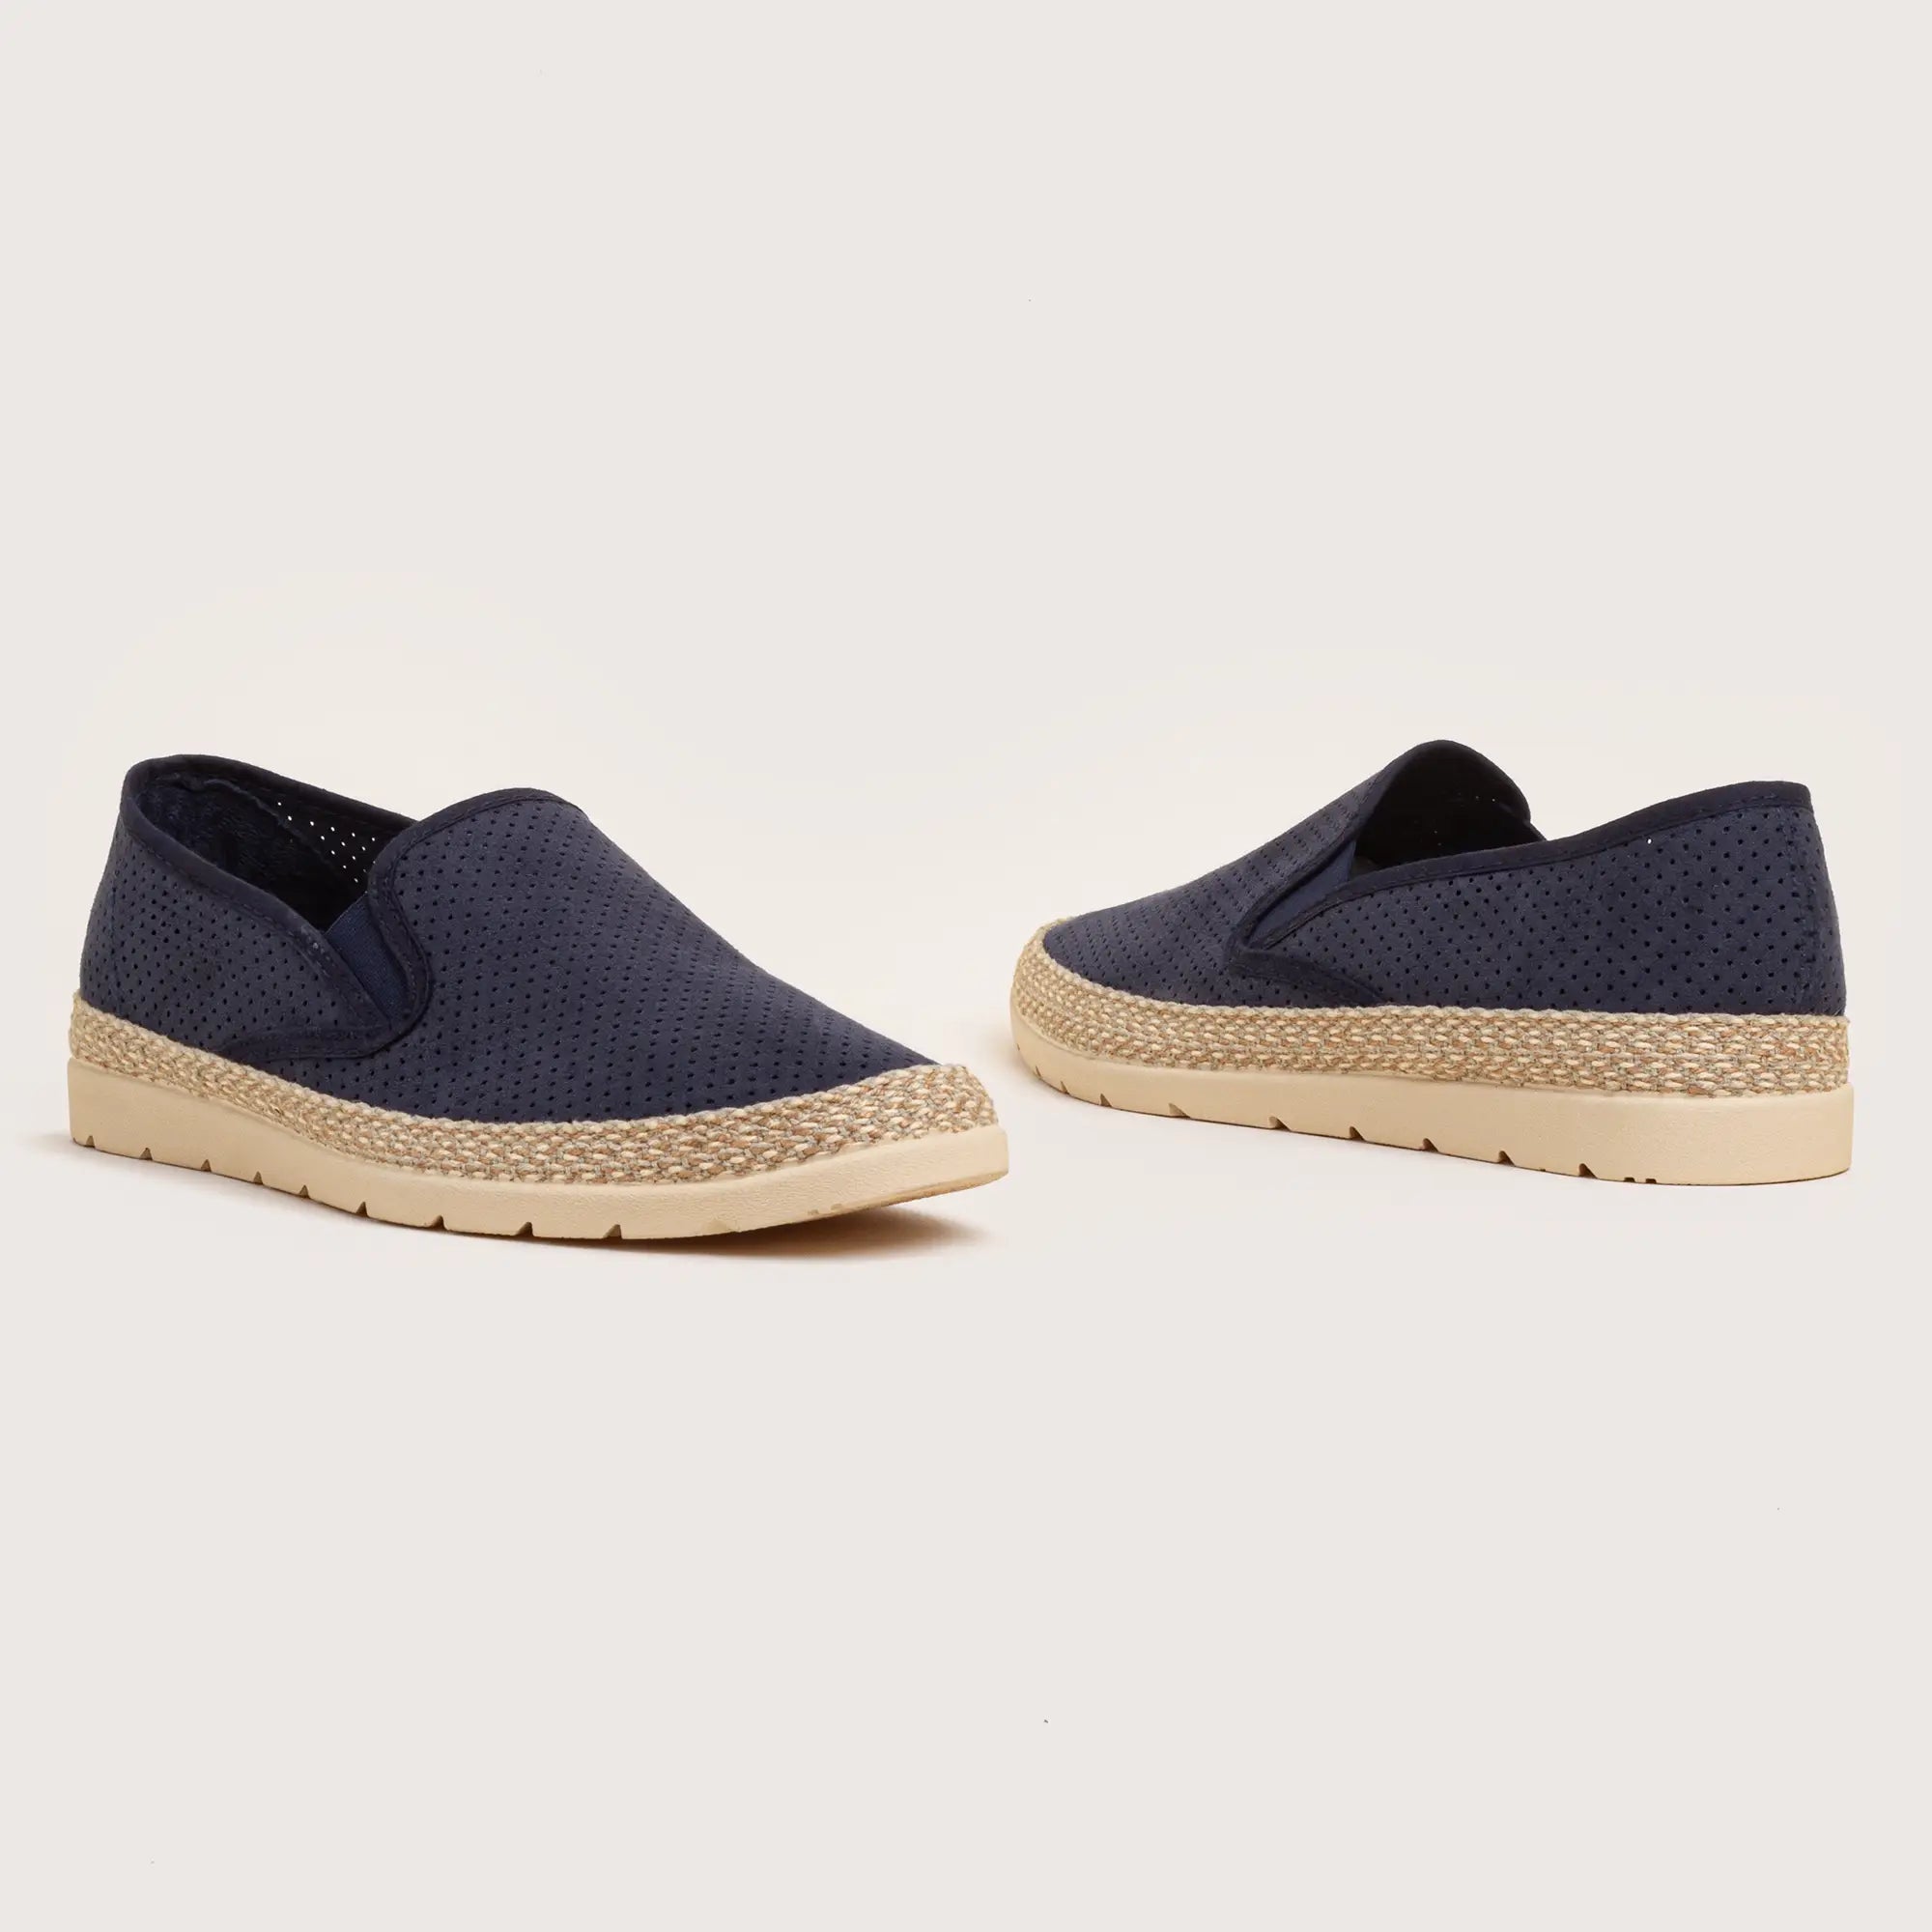 Butler Perforated Suede Slip On - Navy